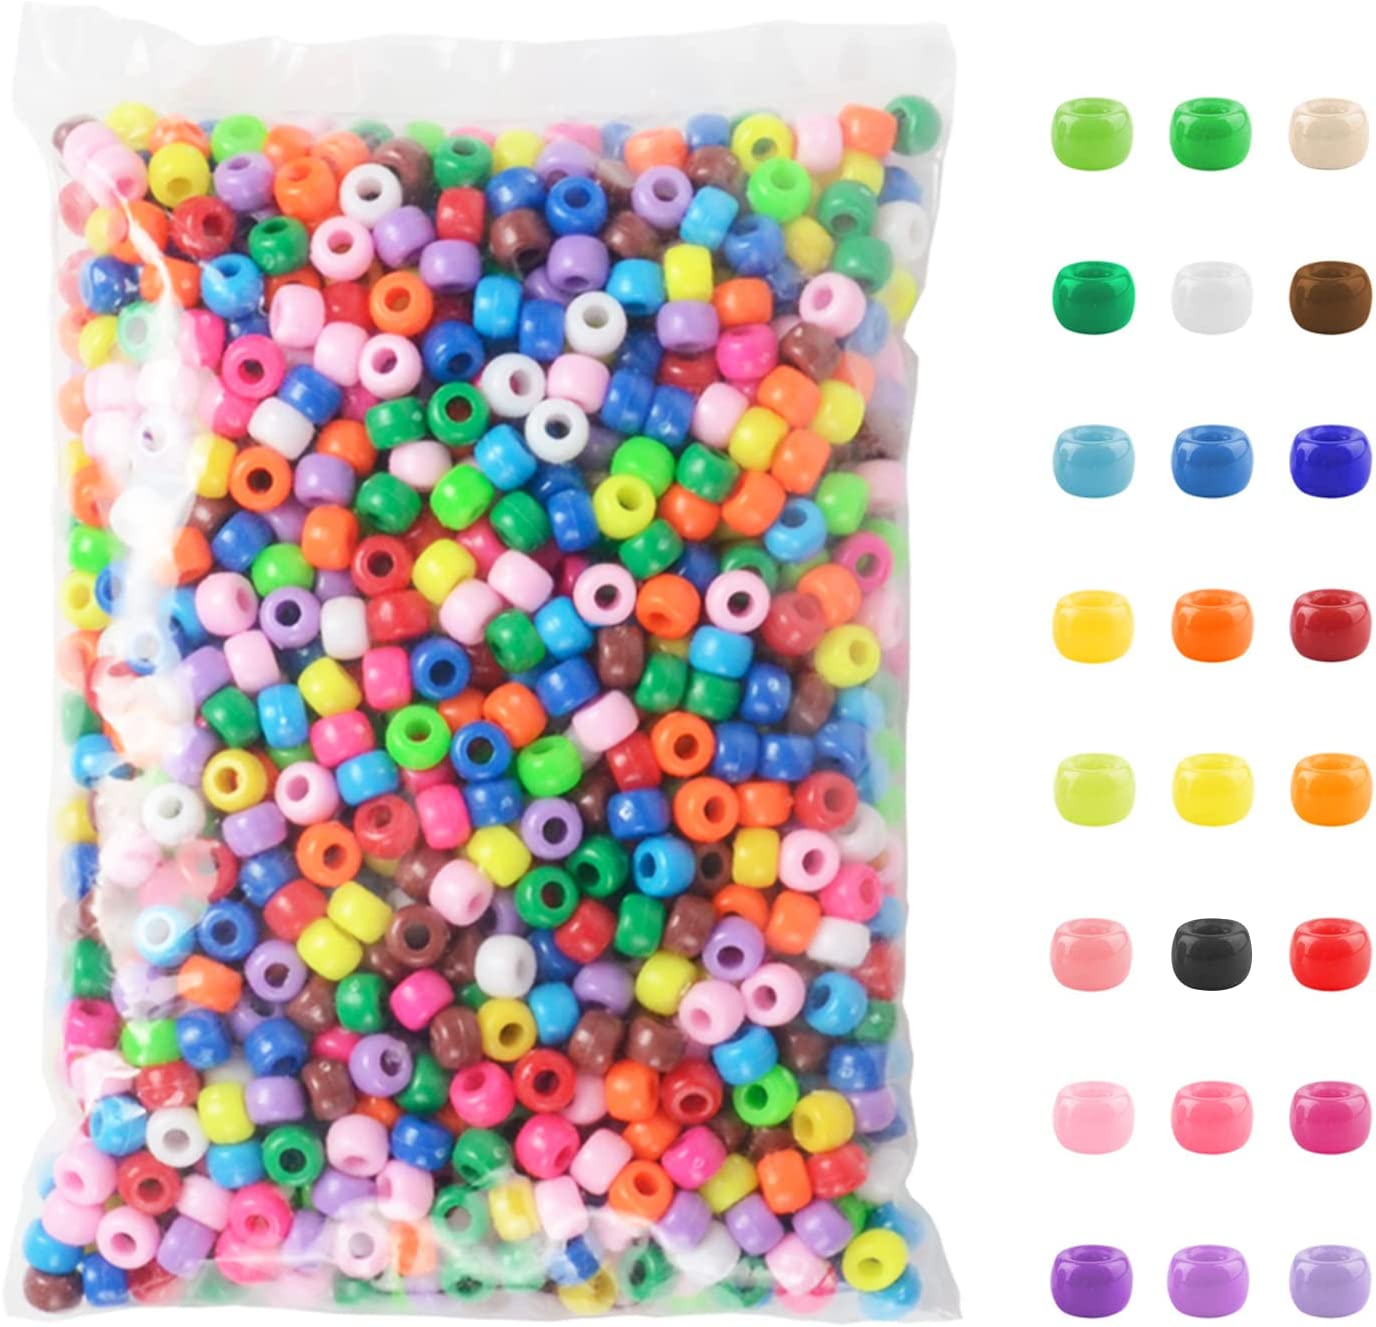 Simetufy 1200 Pcs Pony Beads Plastic Beads for Bracelet Making, Multi-Colored Beads for Hair Braiding, DIY Crafts, Kandi Jewelry, Key Chains and Ornam